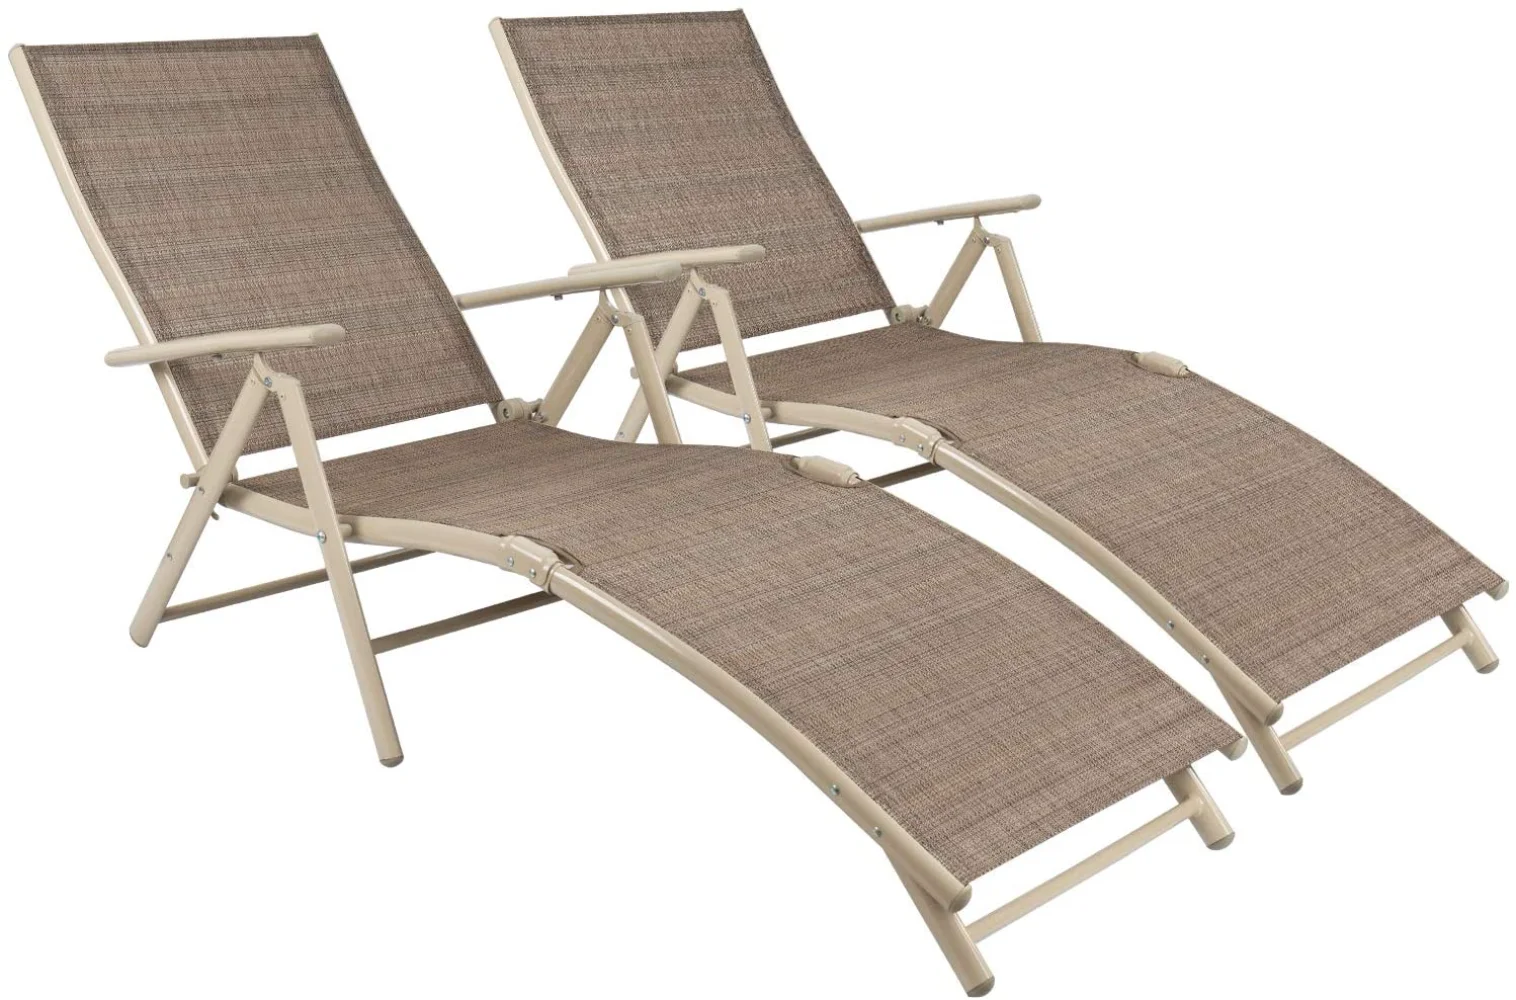 

Patio Lounge Chairs Set of 2 Beach Adjustable Chaise Lounge Outdoor Pool Side Folding Recliners, Beige Folding Chair Recliner